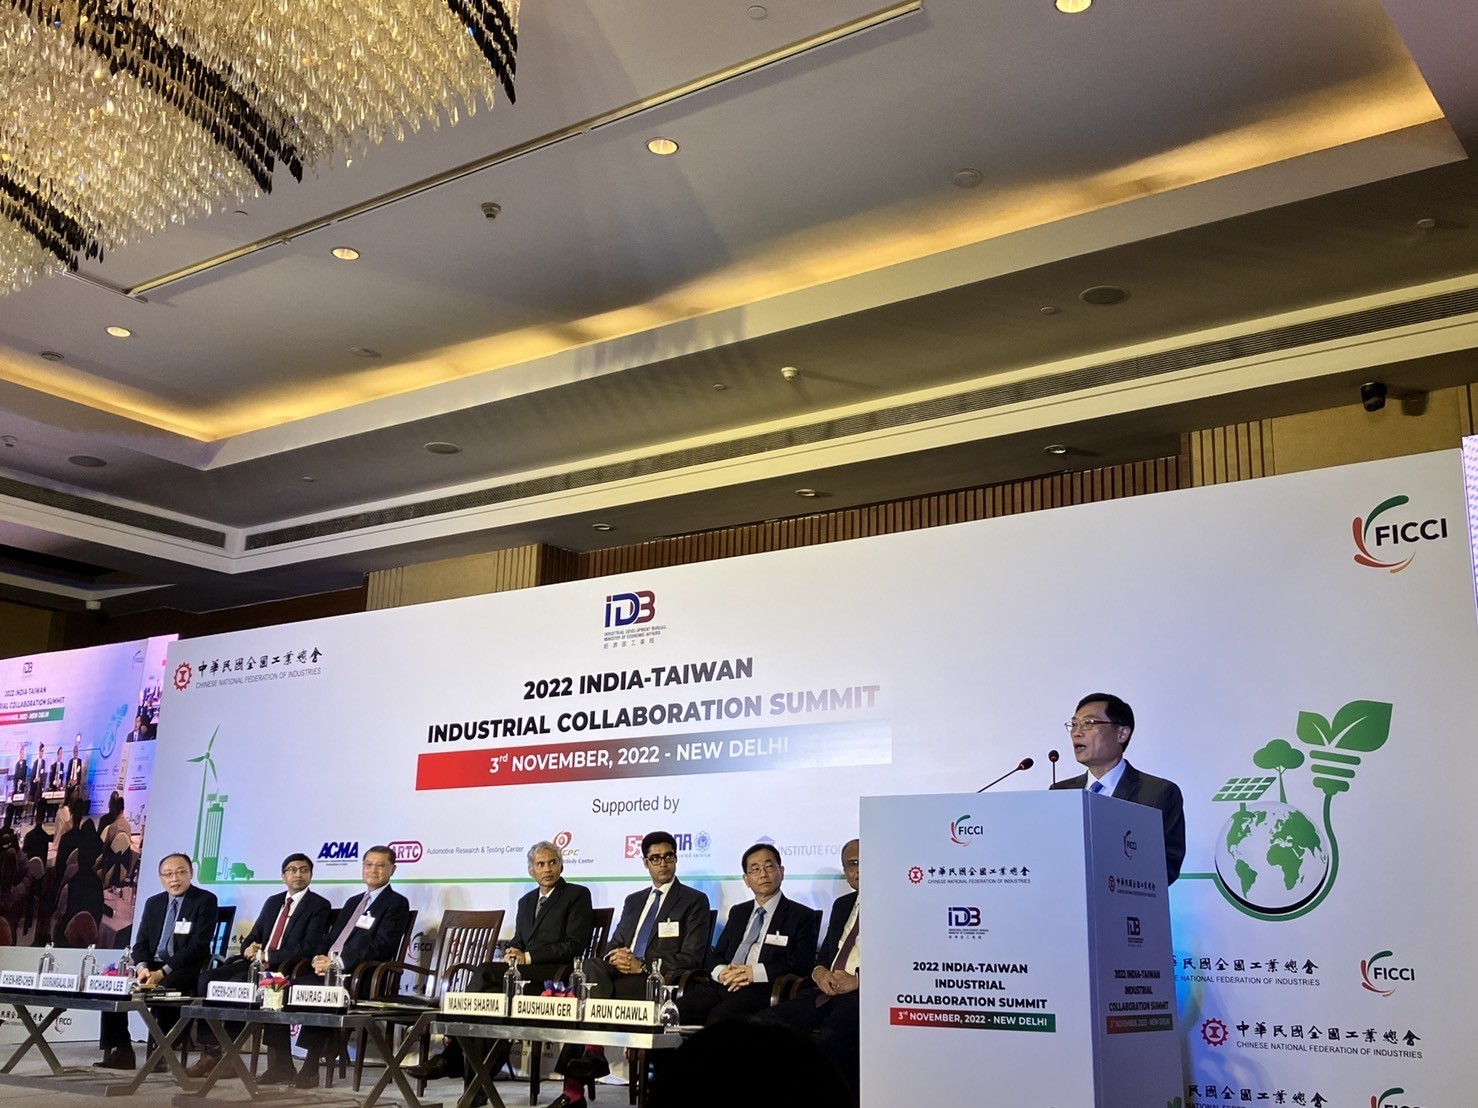 Successful Results of the CEO Roundtable and Industrial Collaboration Summit between Taiwan and India